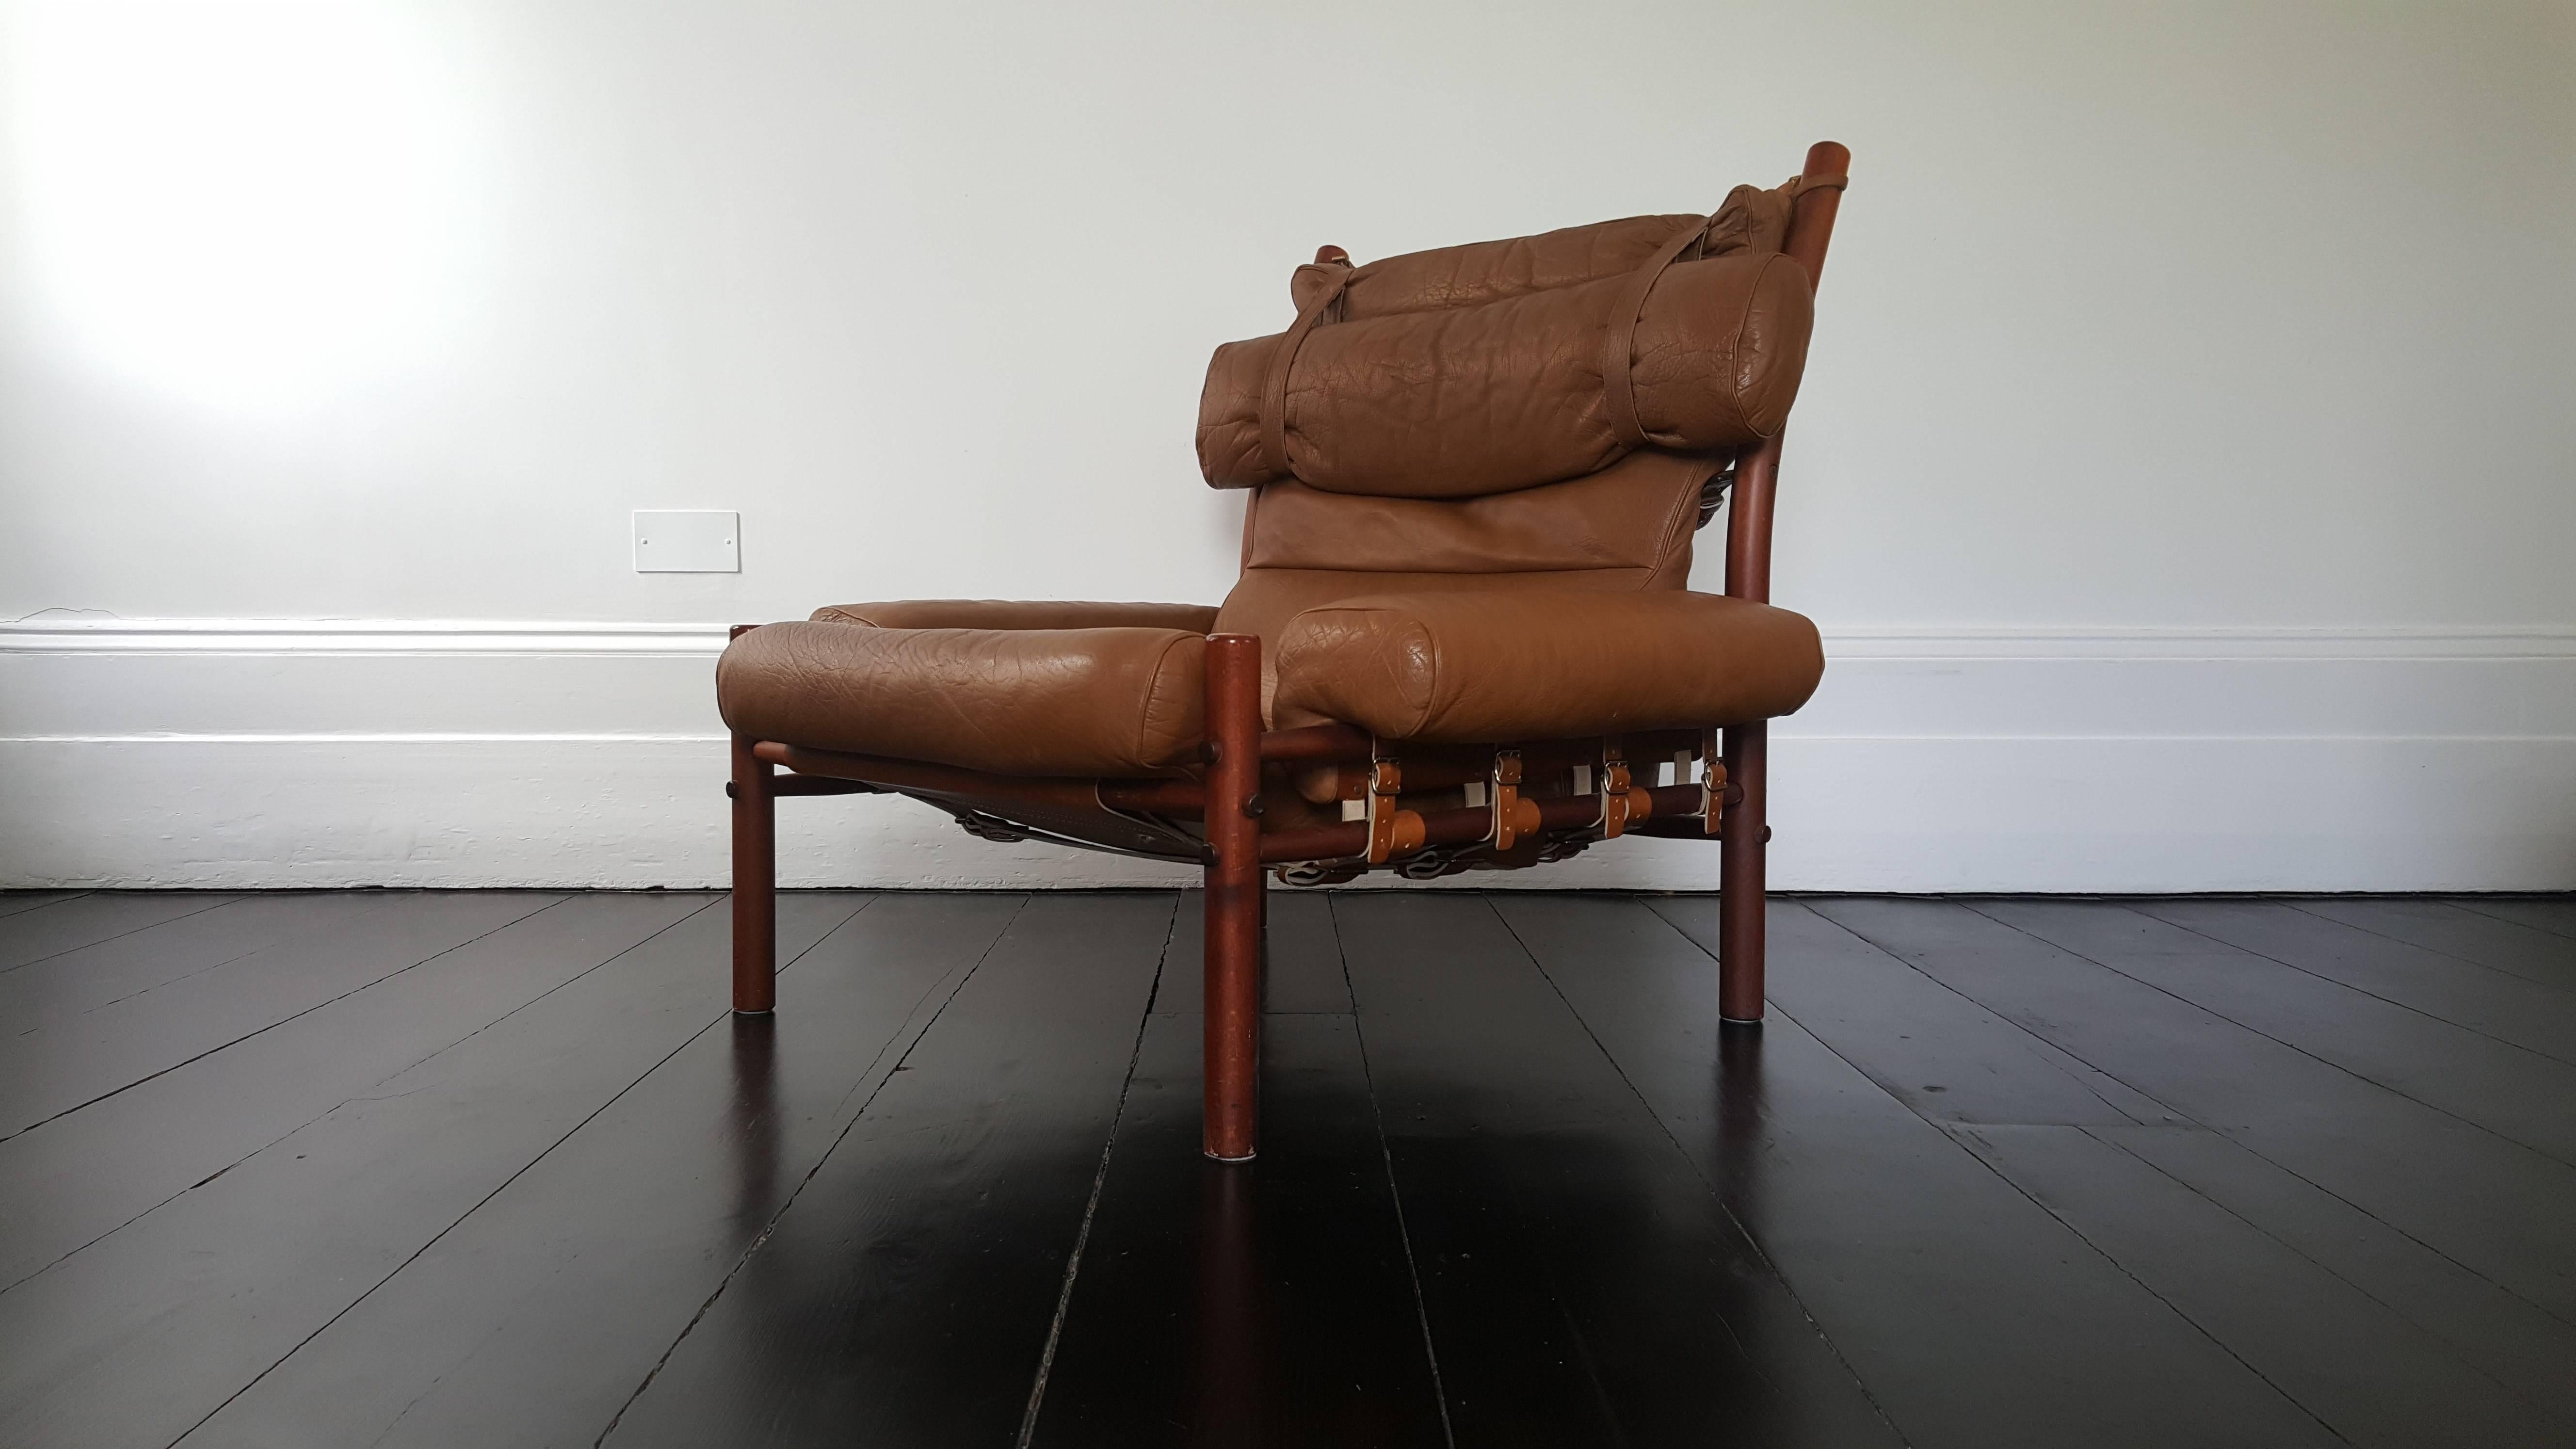 An Inca chair by iconic Swedish designer Arne Norell for Norell Mobler. An extremely comfortable chair which also look amazing. The piece is in good vintage condition.

Viewing by appointment.

International Delivery available, please contact